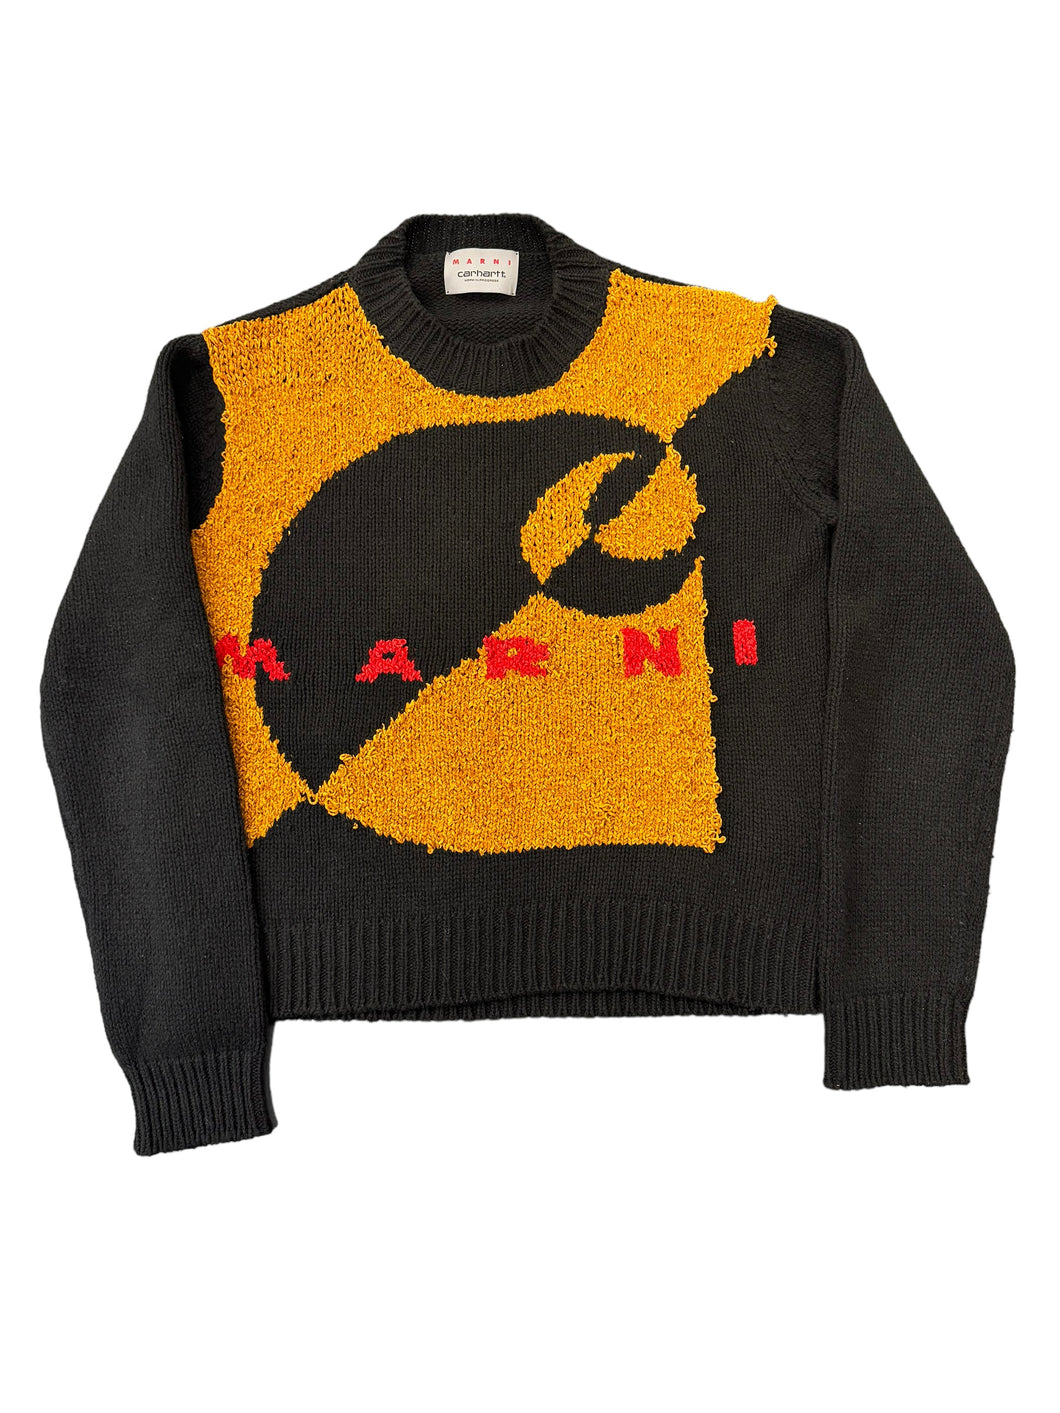 Marni X Carhartt Logo Intarsia-Knitted Sweater Pre-Owned Tagged 48